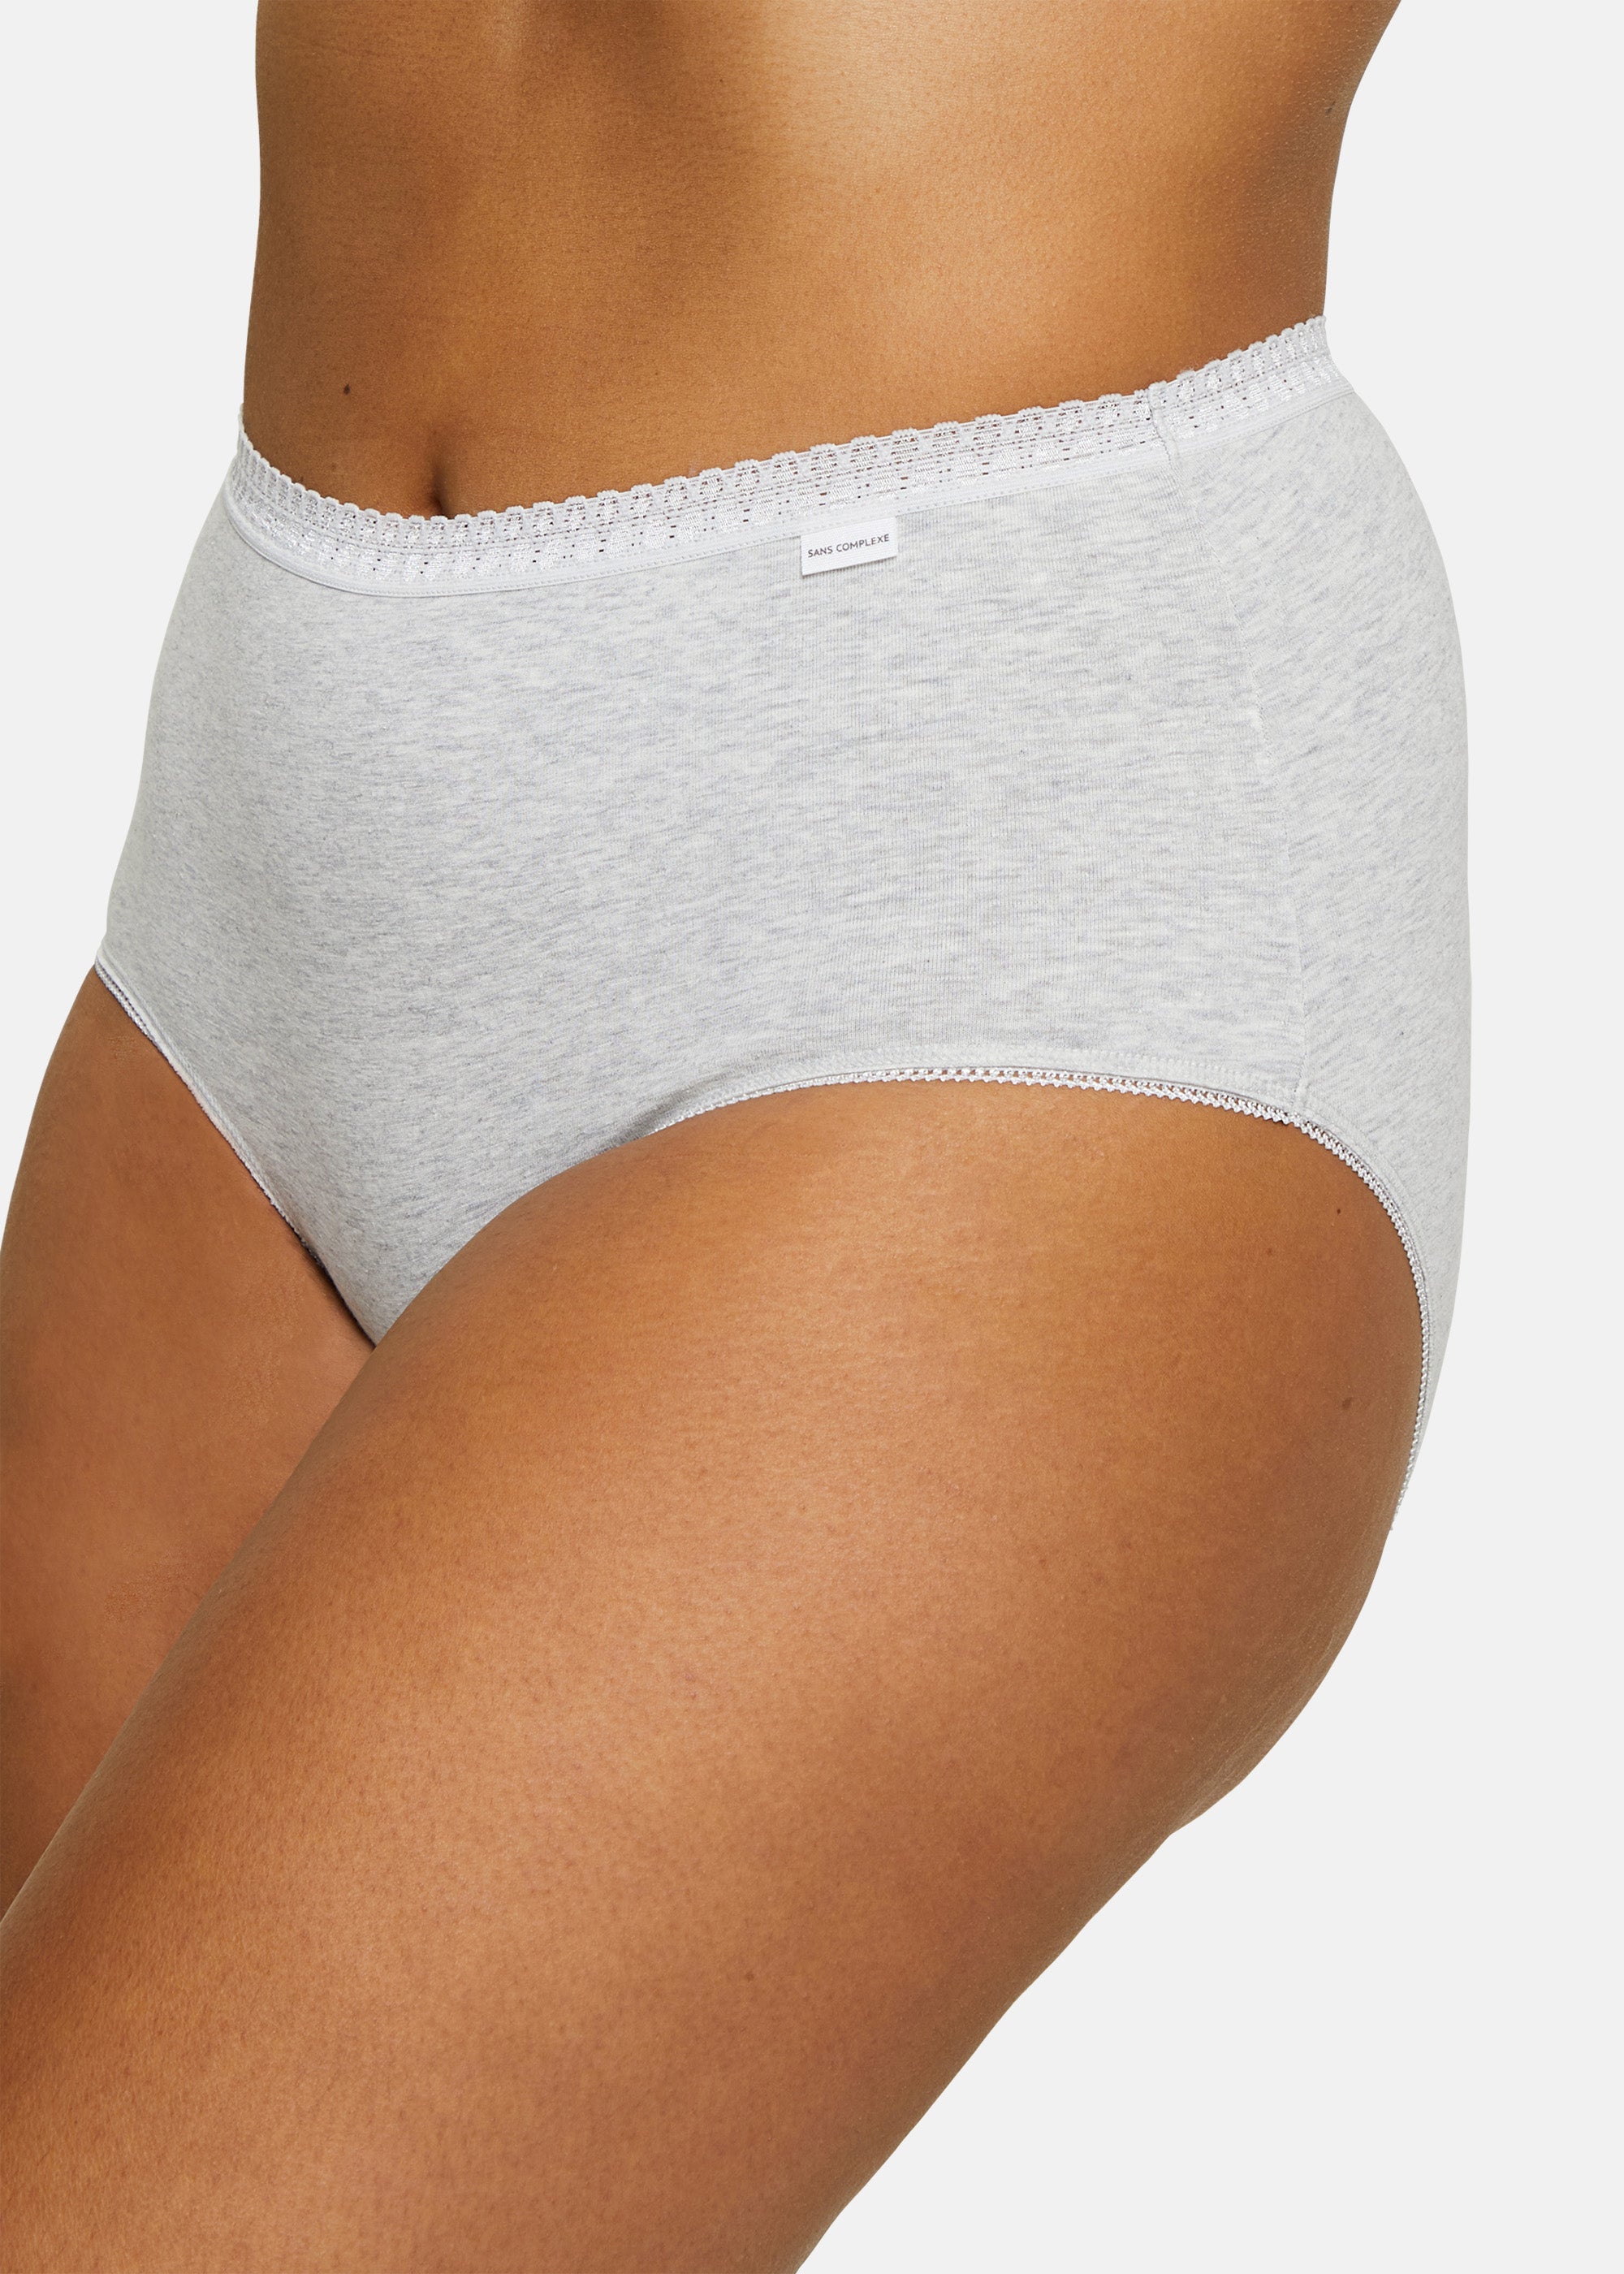 Briefs - Pack of 2 Classic Cotton Heather gray 